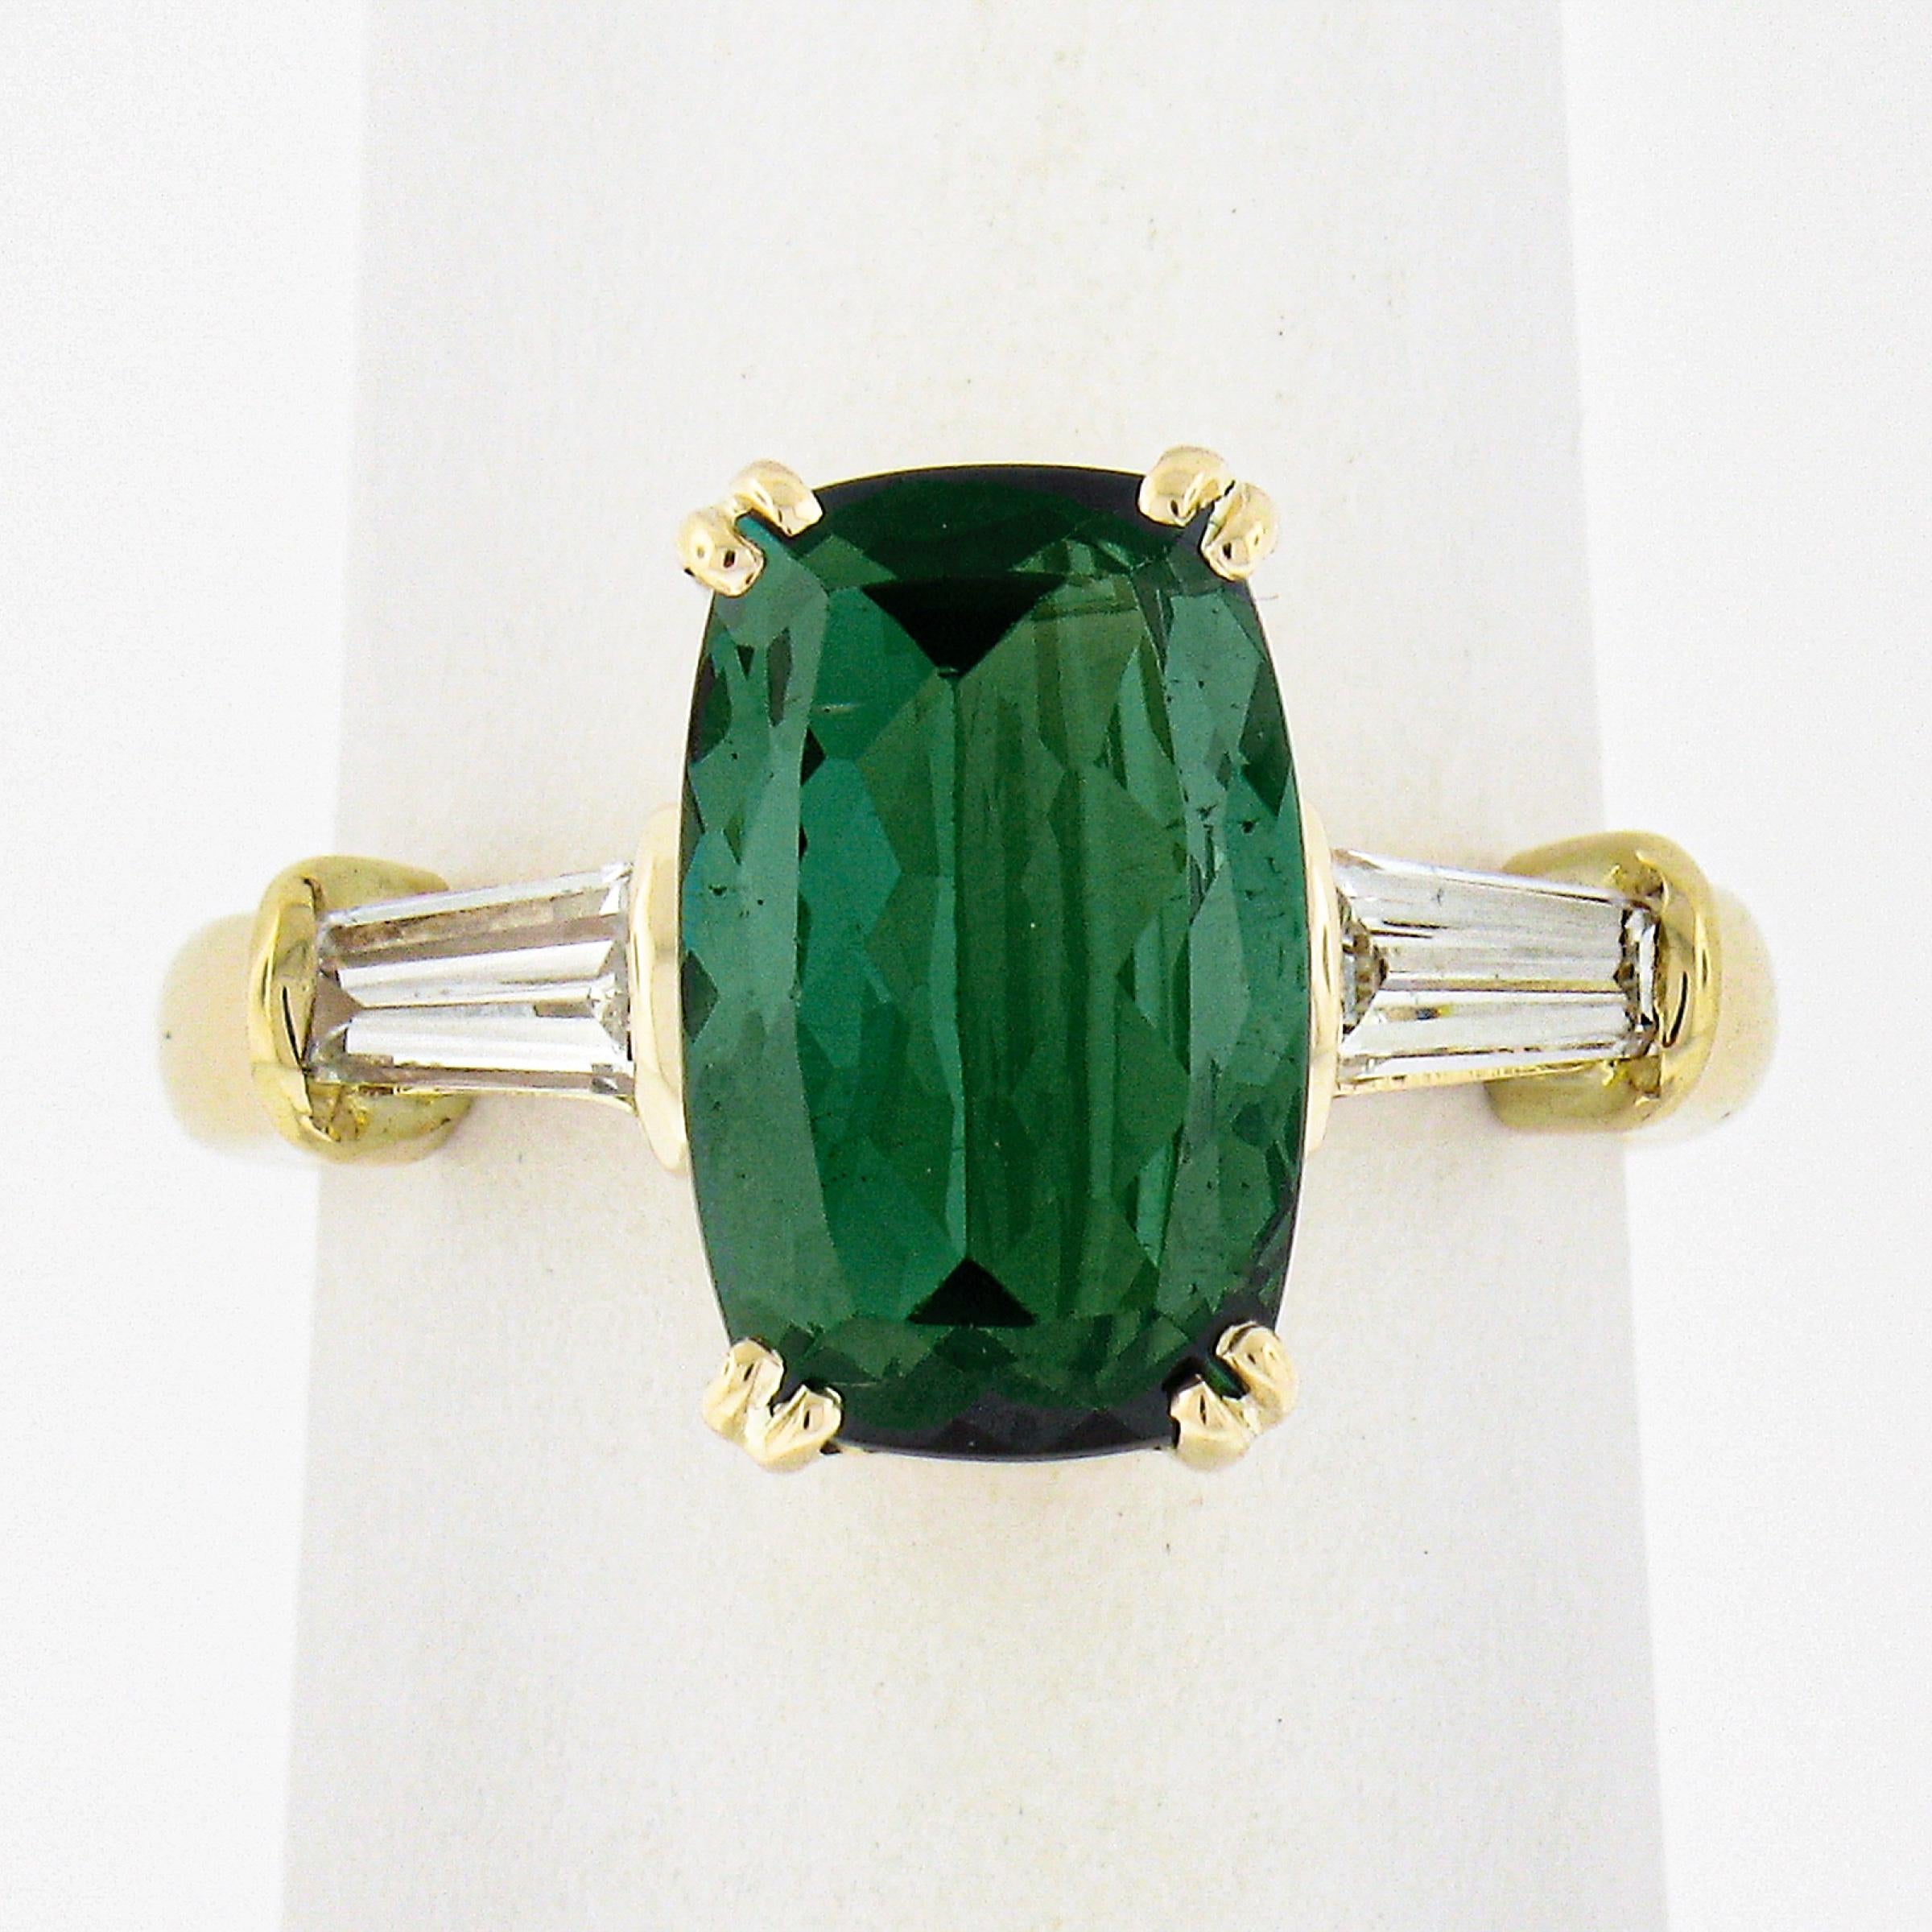 --Stone(s):--
(1) Natural Genuine Tourmaline - Elongated Cushion Cut - Dual Prong Set - Lively Green Color - 2.24ct (exact)
(2) Natural Genuine Diamonds - Baguette Cut - Channel Set - H/I Color - VS1/VS2 Clarity - 0.40ctw (approx.)

Material: Solid